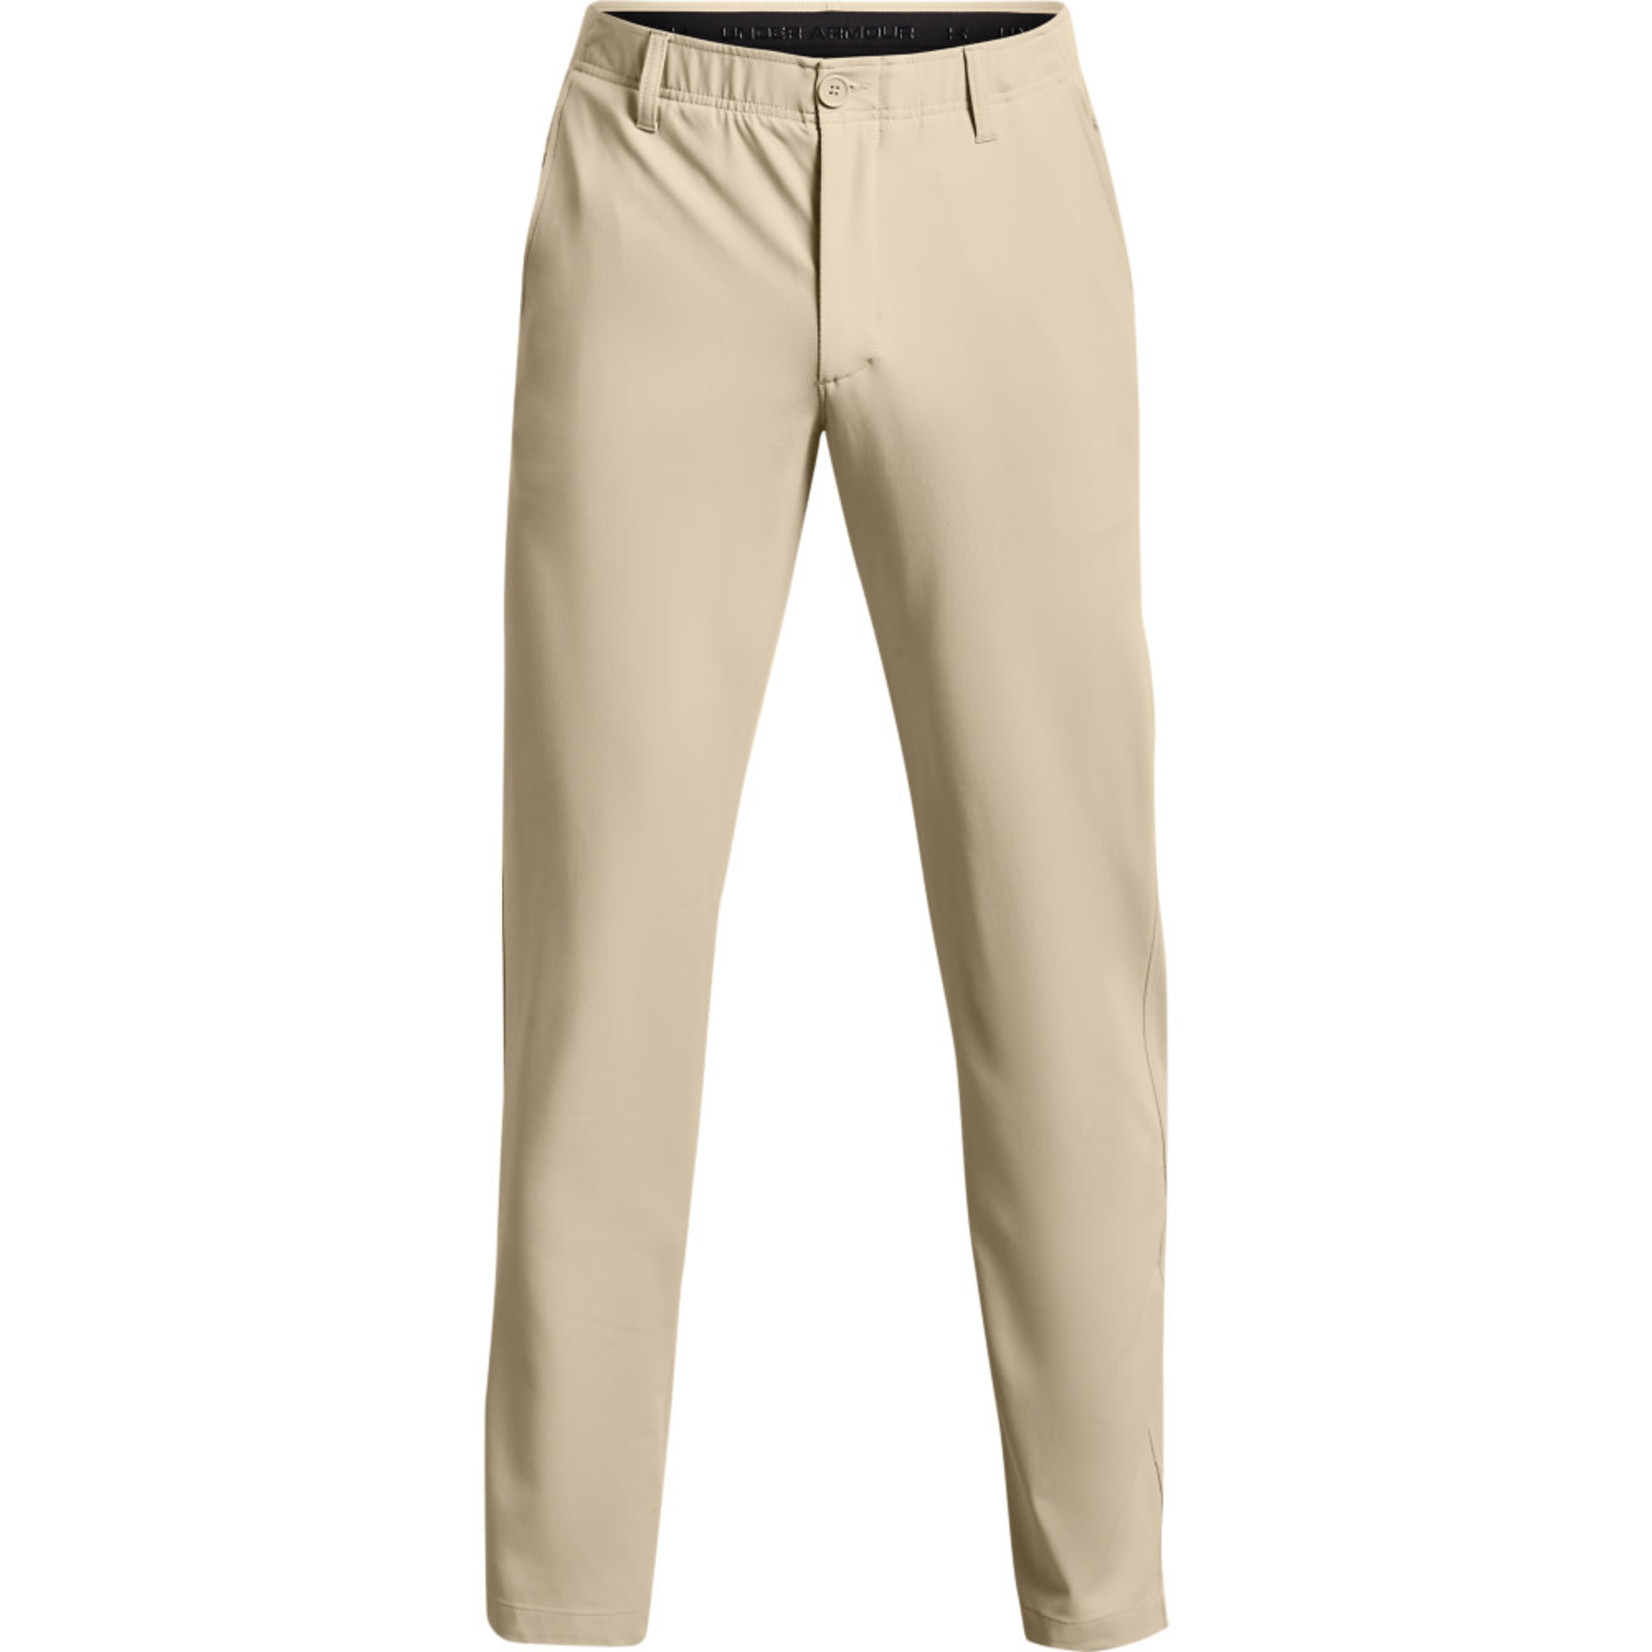 Under Armour Under Armour Mens DRIVE TAPERED Pant - Khaki Base